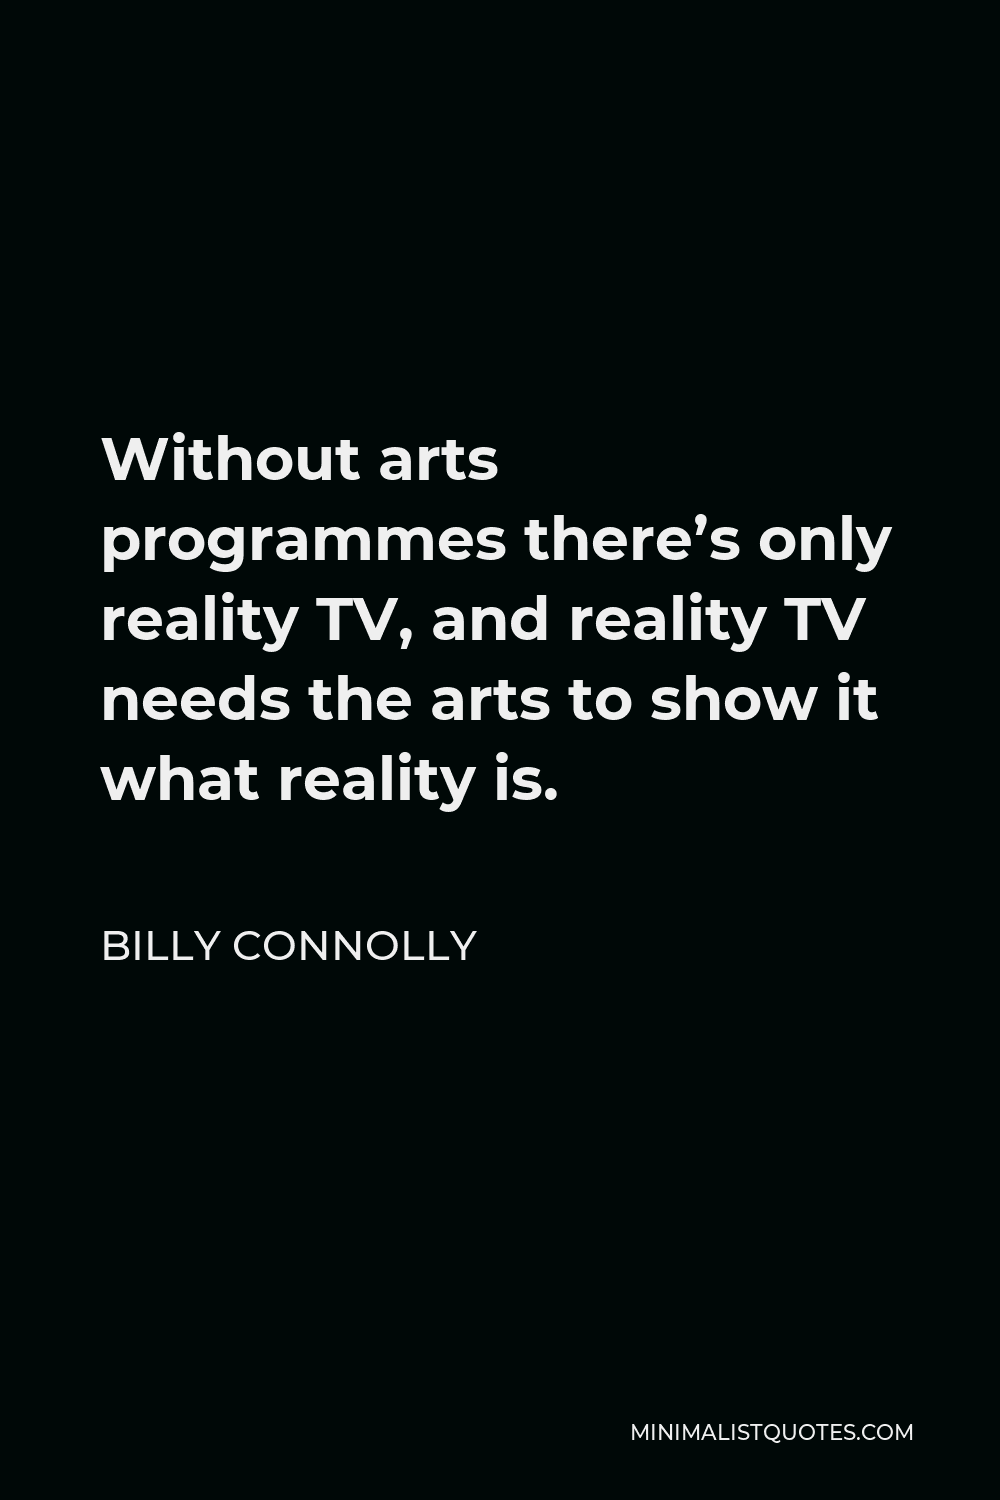 Billy Connolly Quote - Without arts programmes there’s only reality TV, and reality TV needs the arts to show it what reality is.